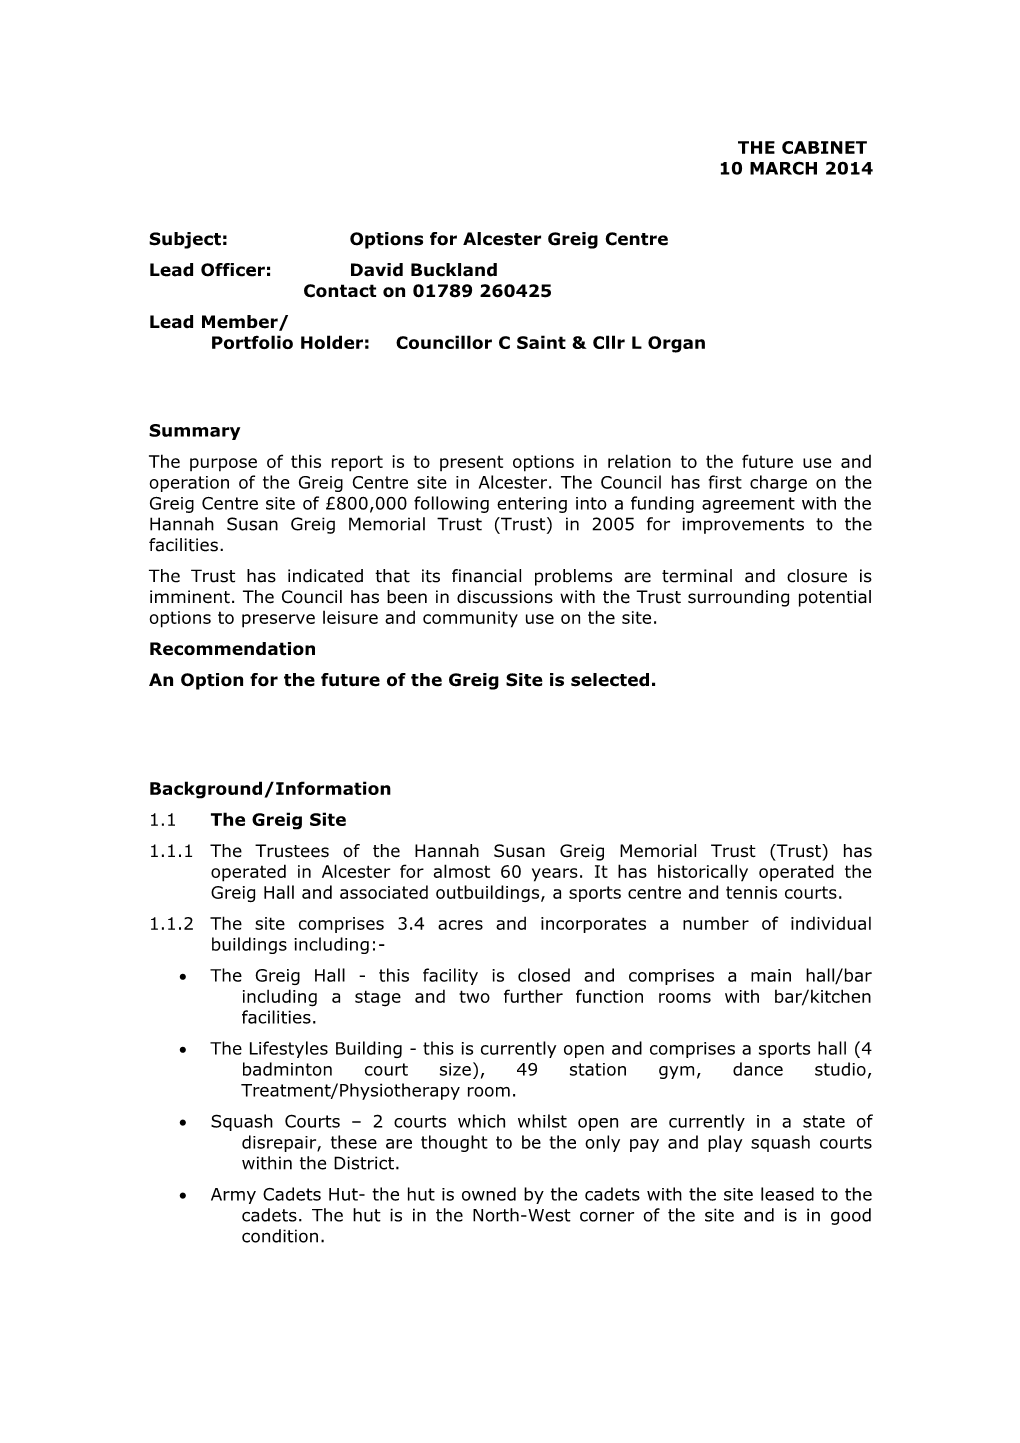 Subject: Options for Alcester Greig Centre